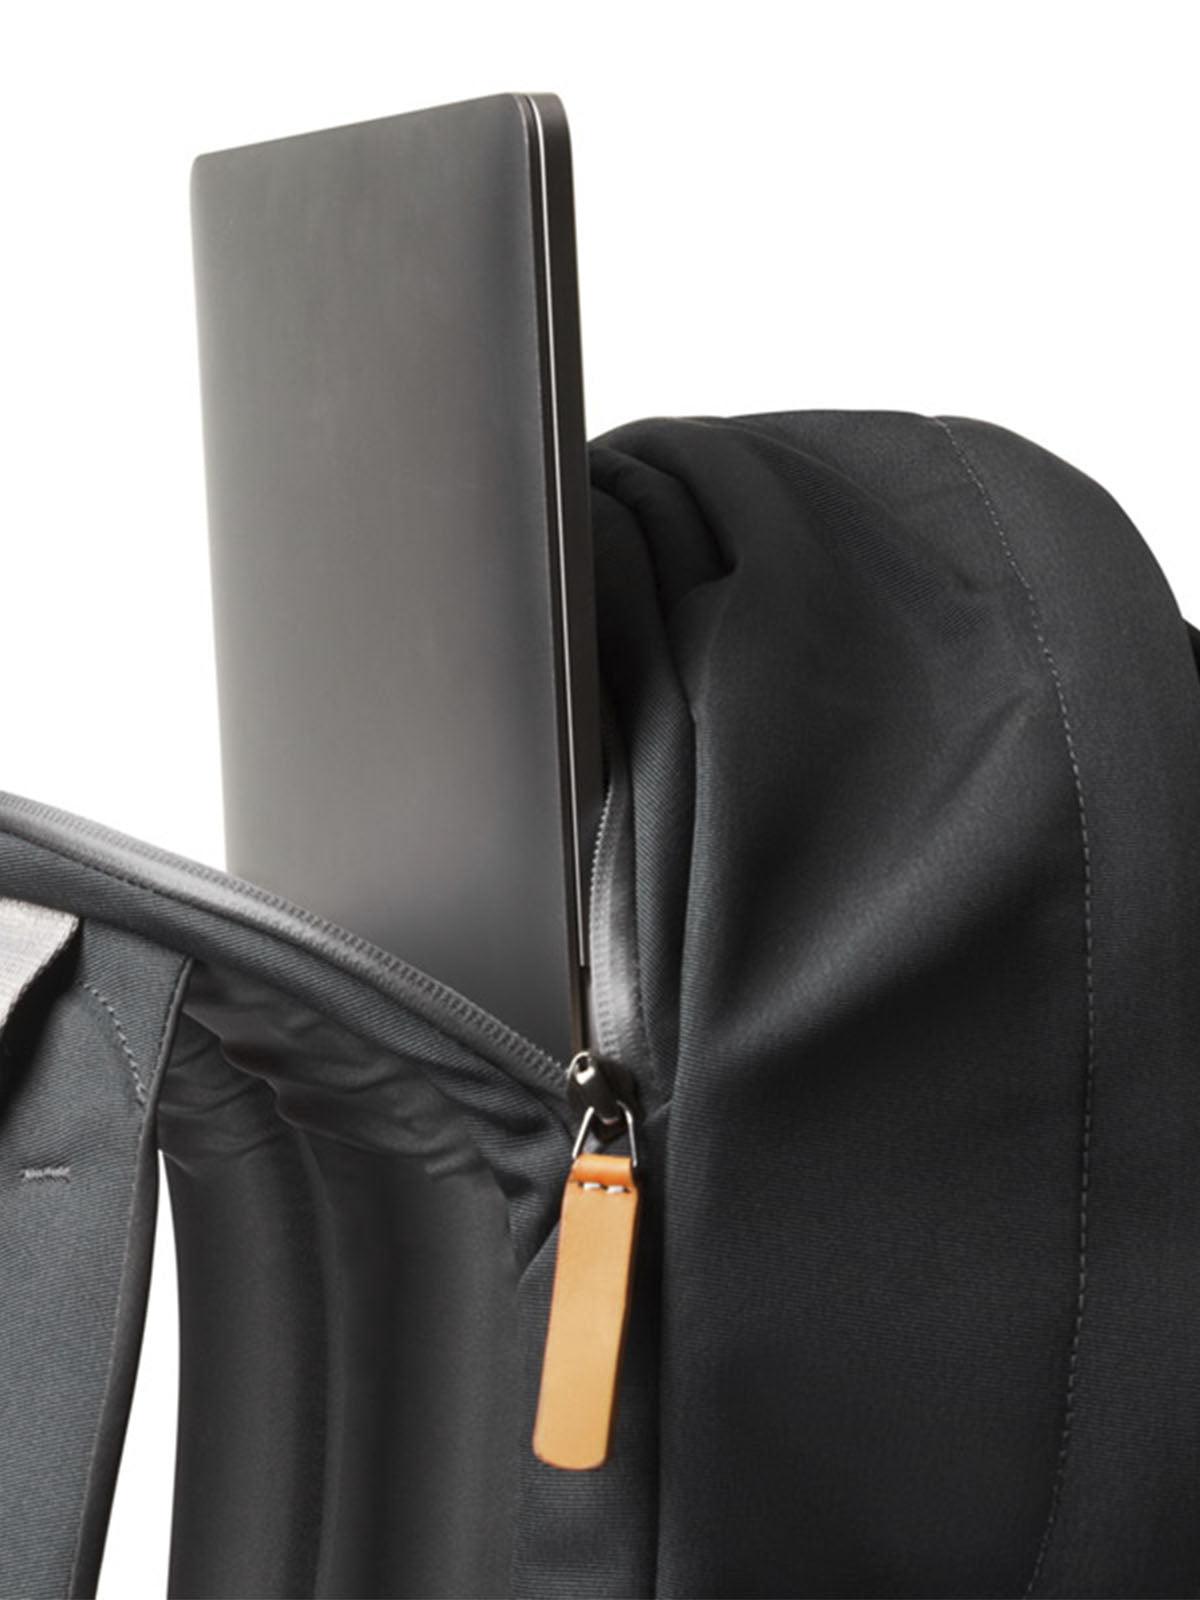 Bellroy Classic Backpack Plus Second Edition Slate